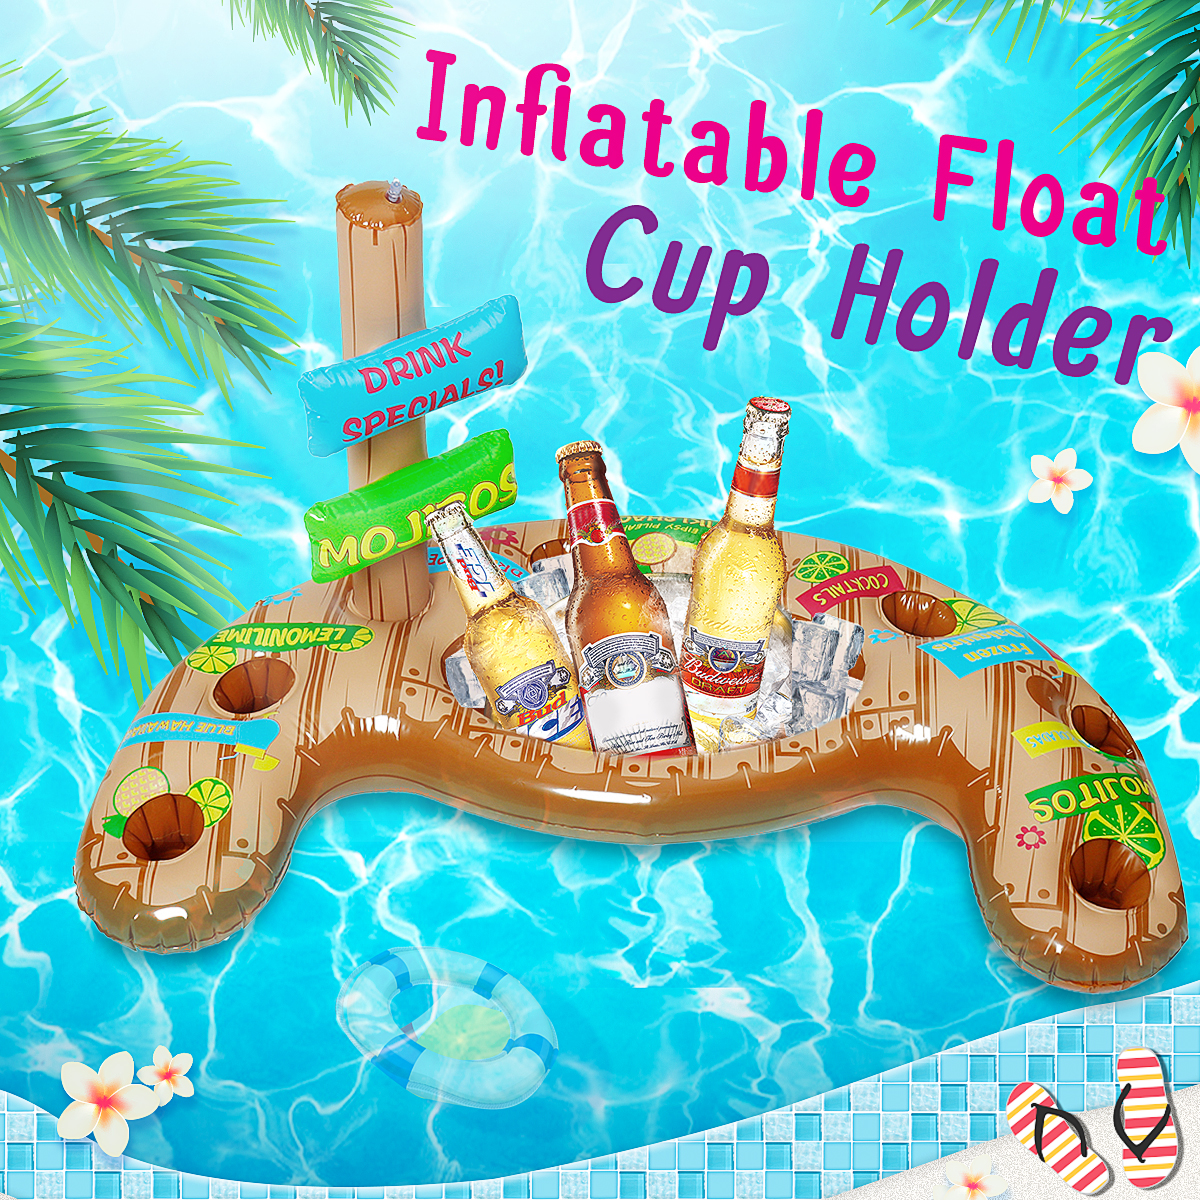 Inflatable-Float-Cup-Holder-Drink-Ice-Bucket-Cooler-Beach-Swim-Party-Water-Play-Fun-Toy-1509216-1